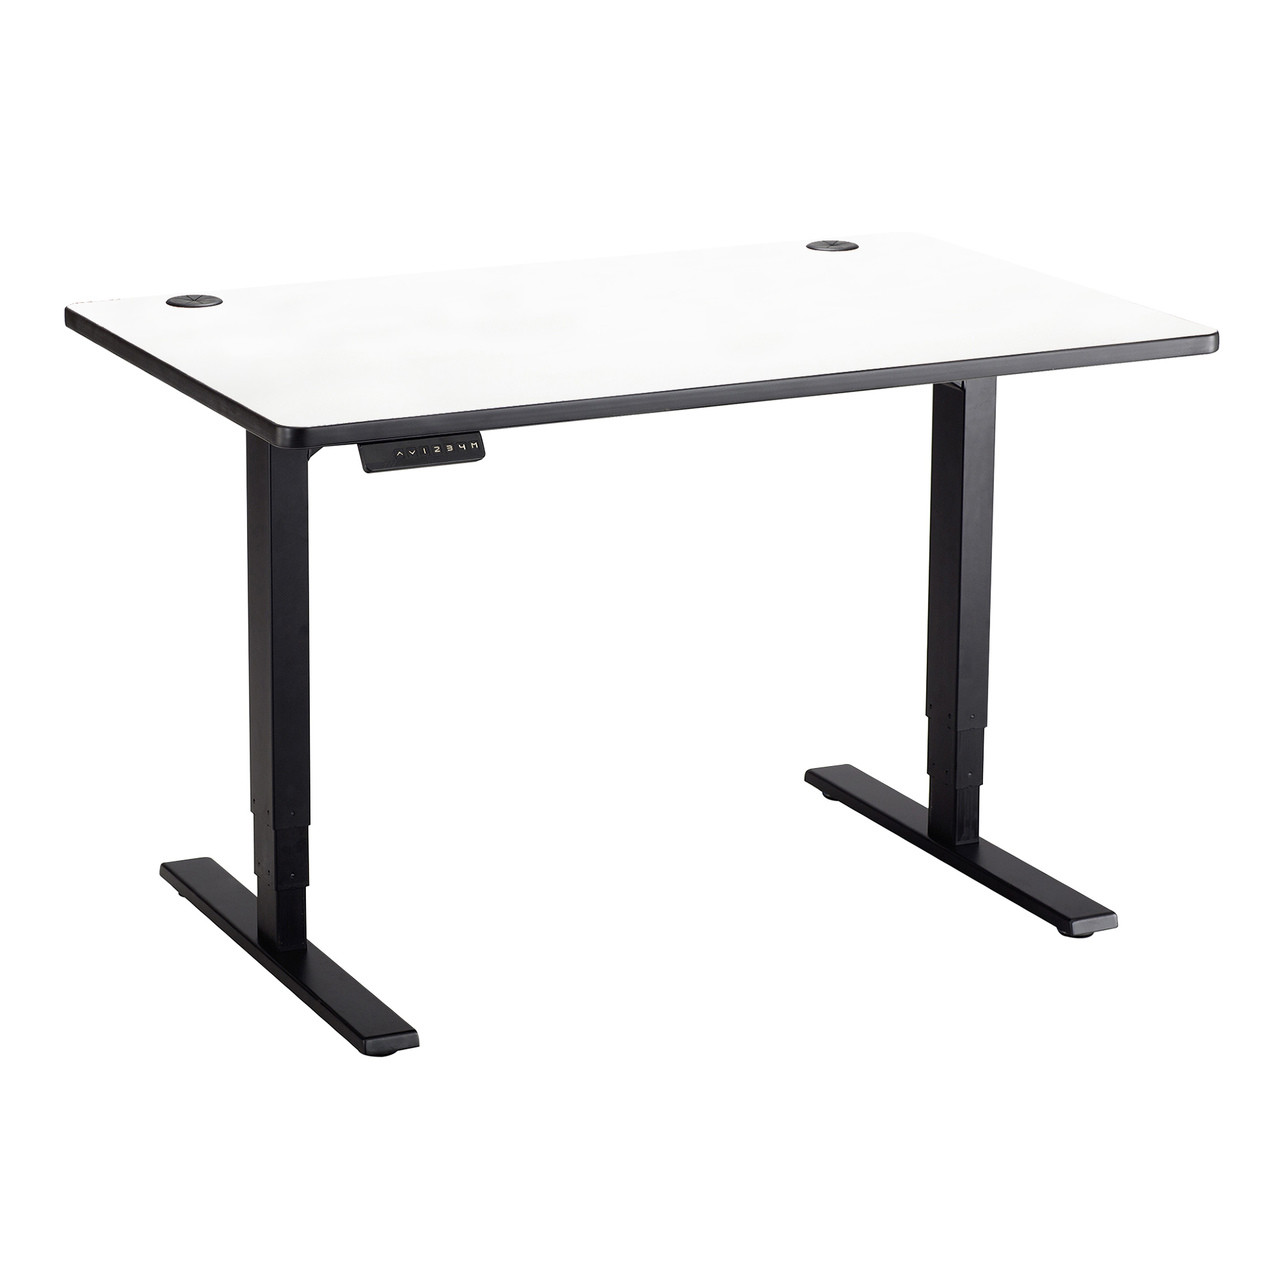 48 x 30" Top for Height-Adjustable Table